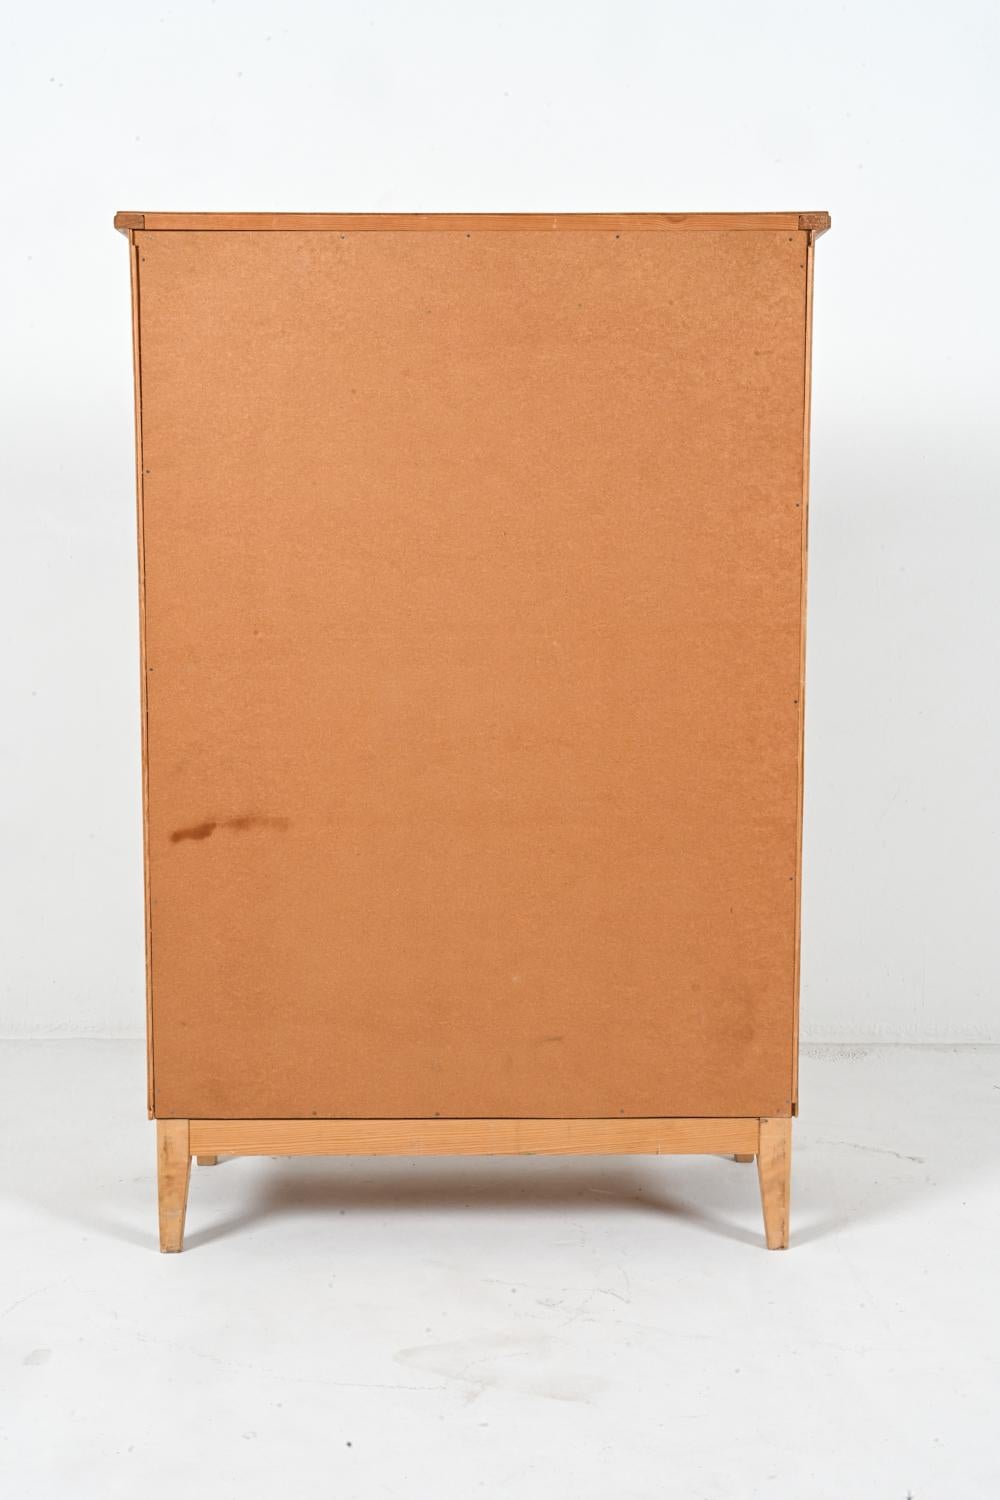 Swedish Modern Pine Tall Chest of Drawers, c. 1960's For Sale 7